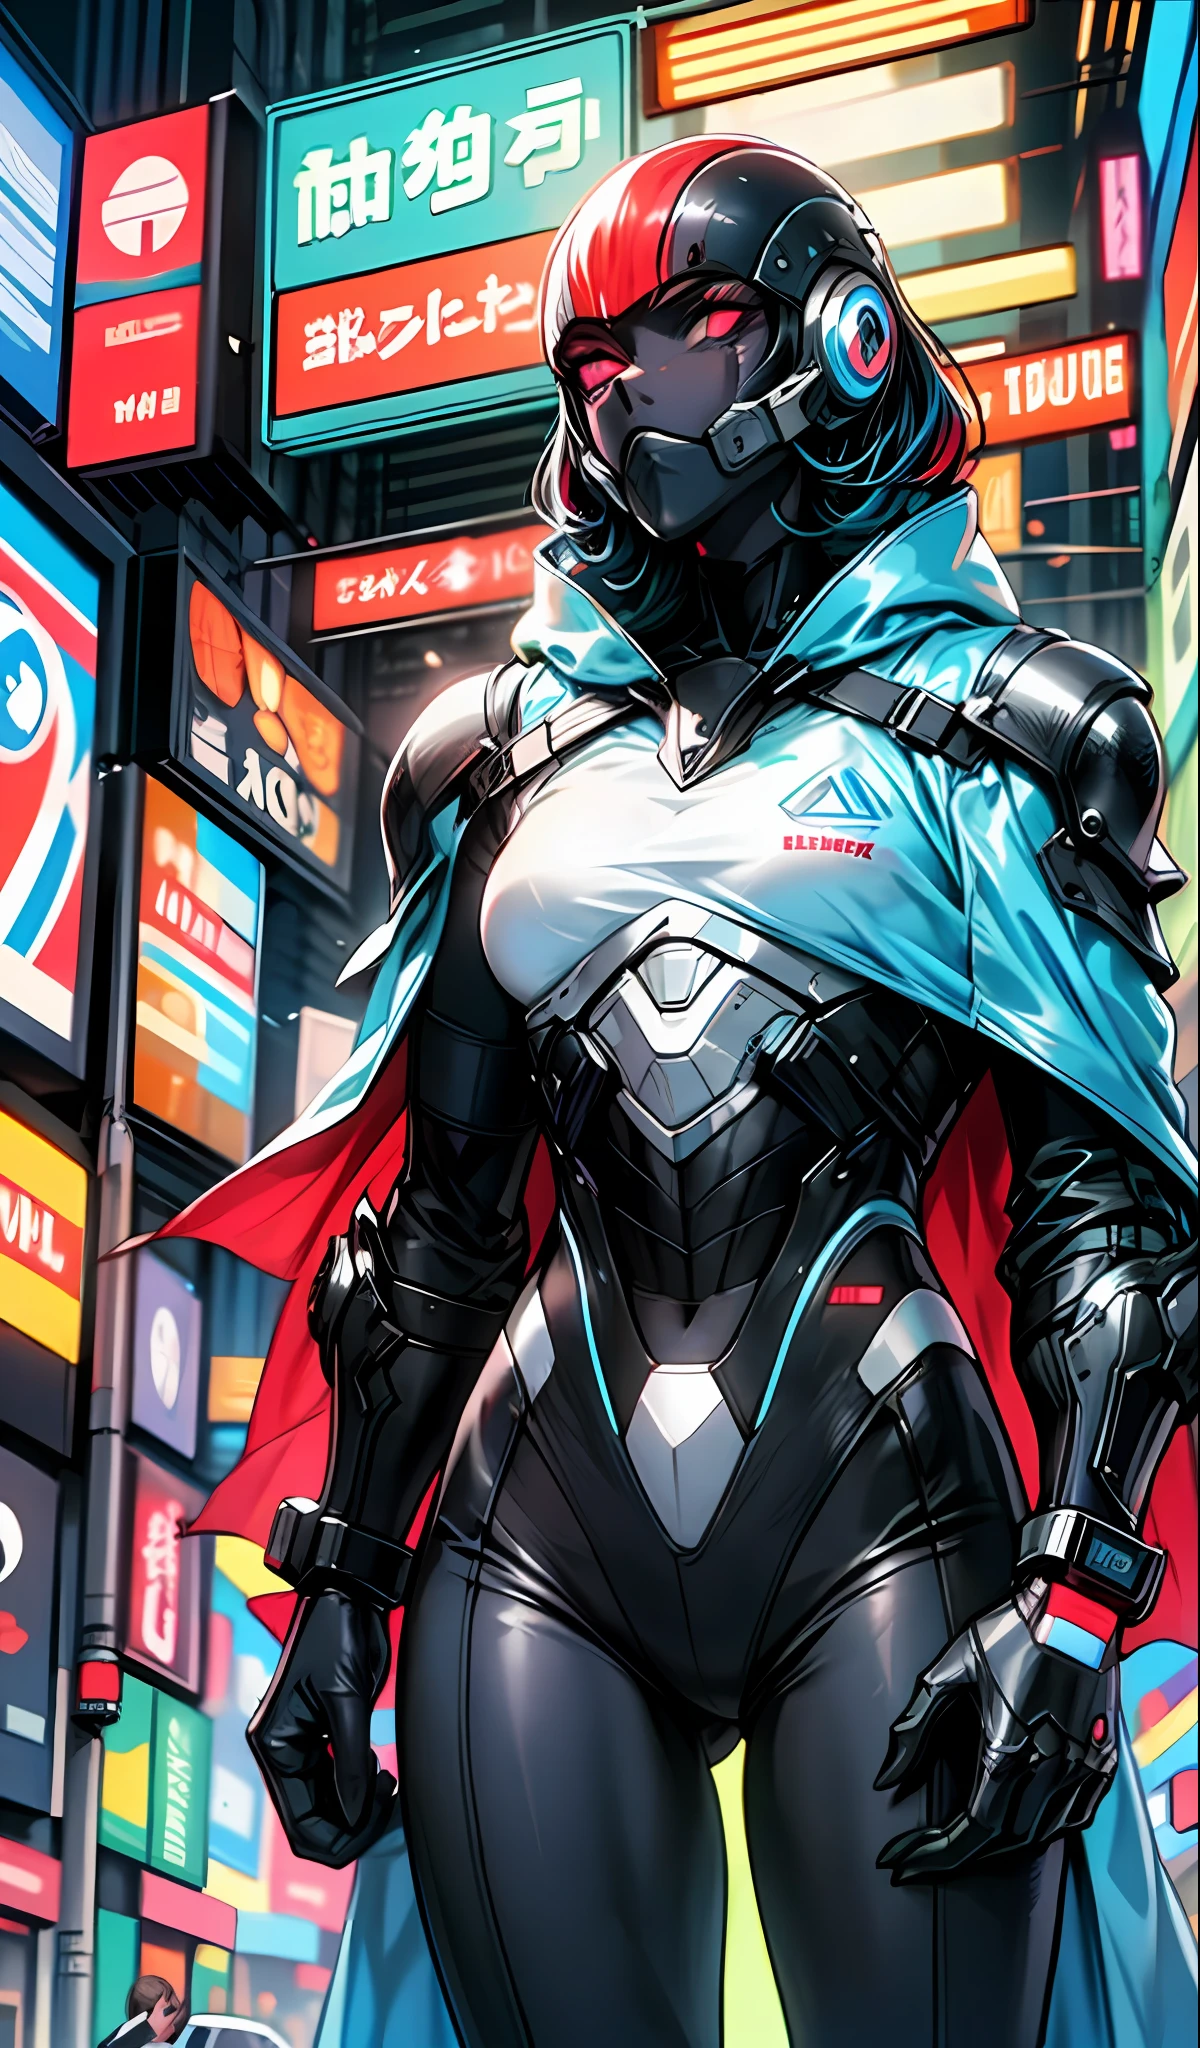 Robort Derpd Ranger working for the megacorporation Scifi, elite corporate enforcer patrolling the streets, wearing detailed multicolored cloaks cape, corporate offices, cyberpunk scene, busy street, neon lights